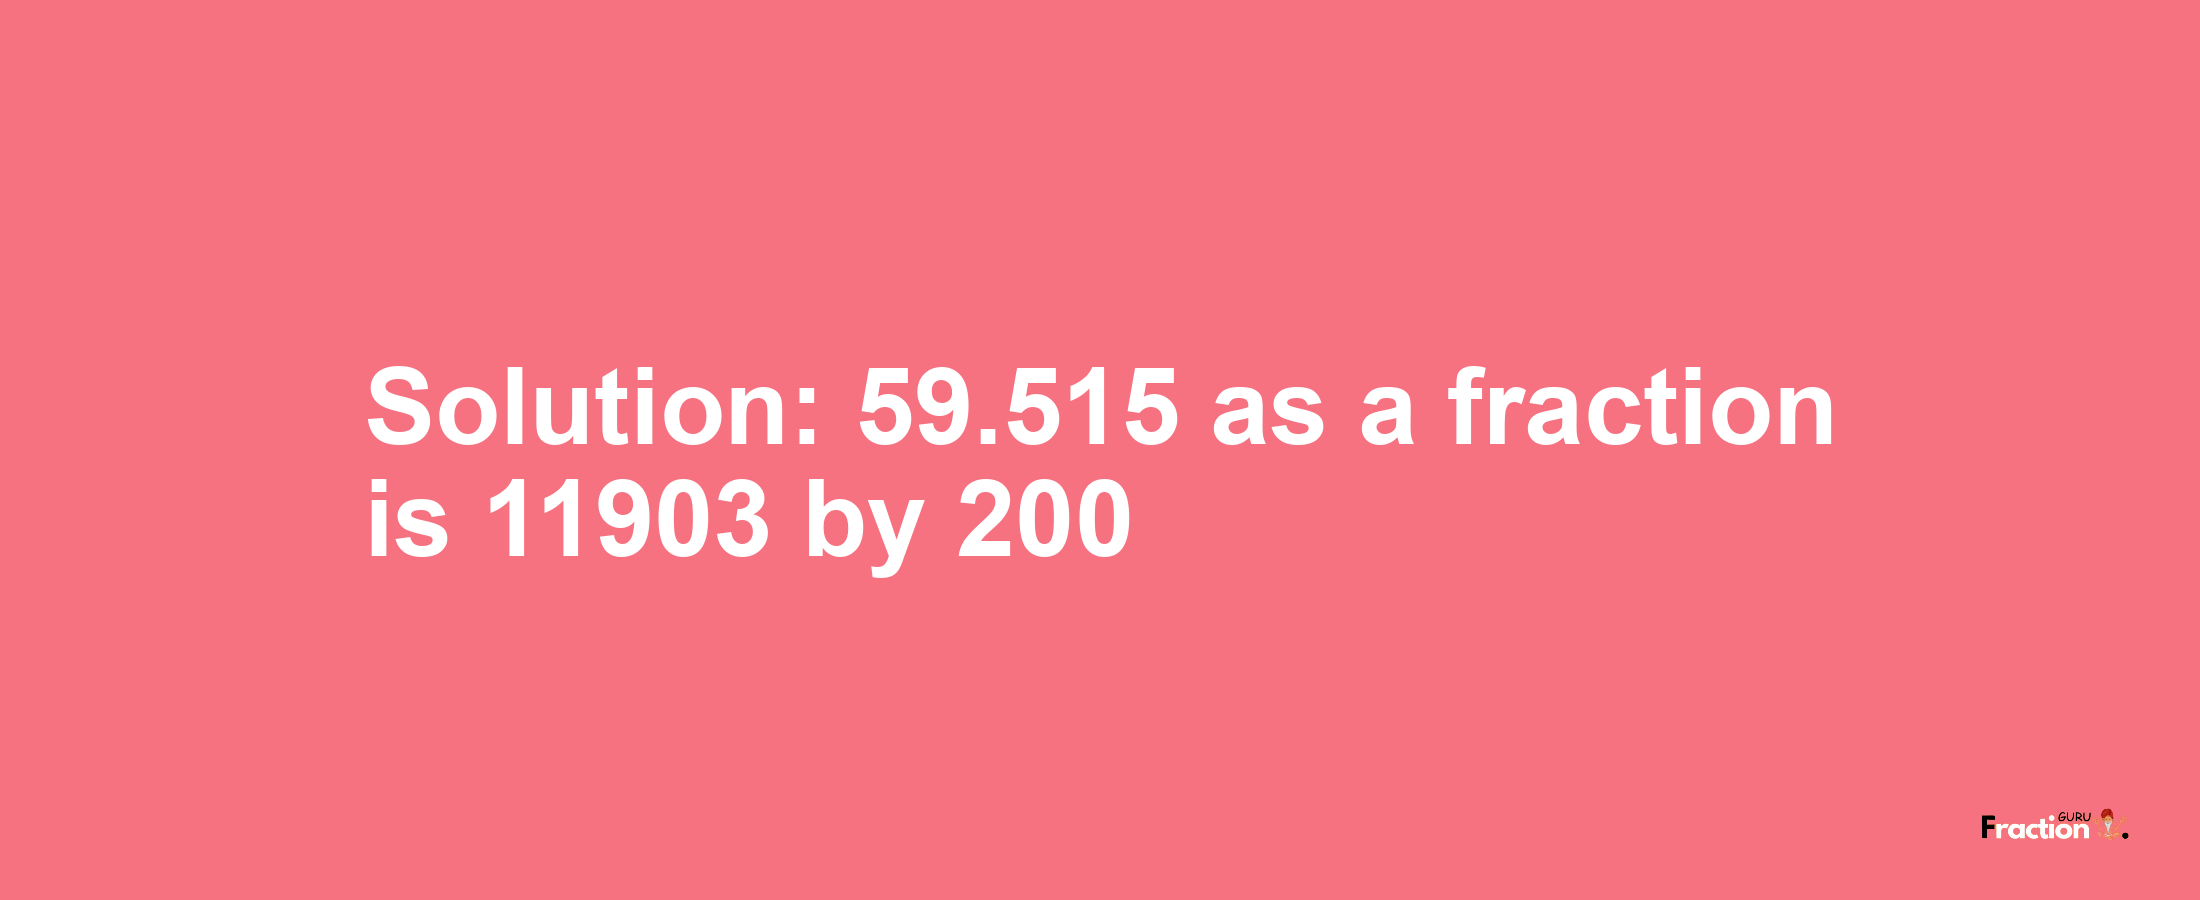 Solution:59.515 as a fraction is 11903/200